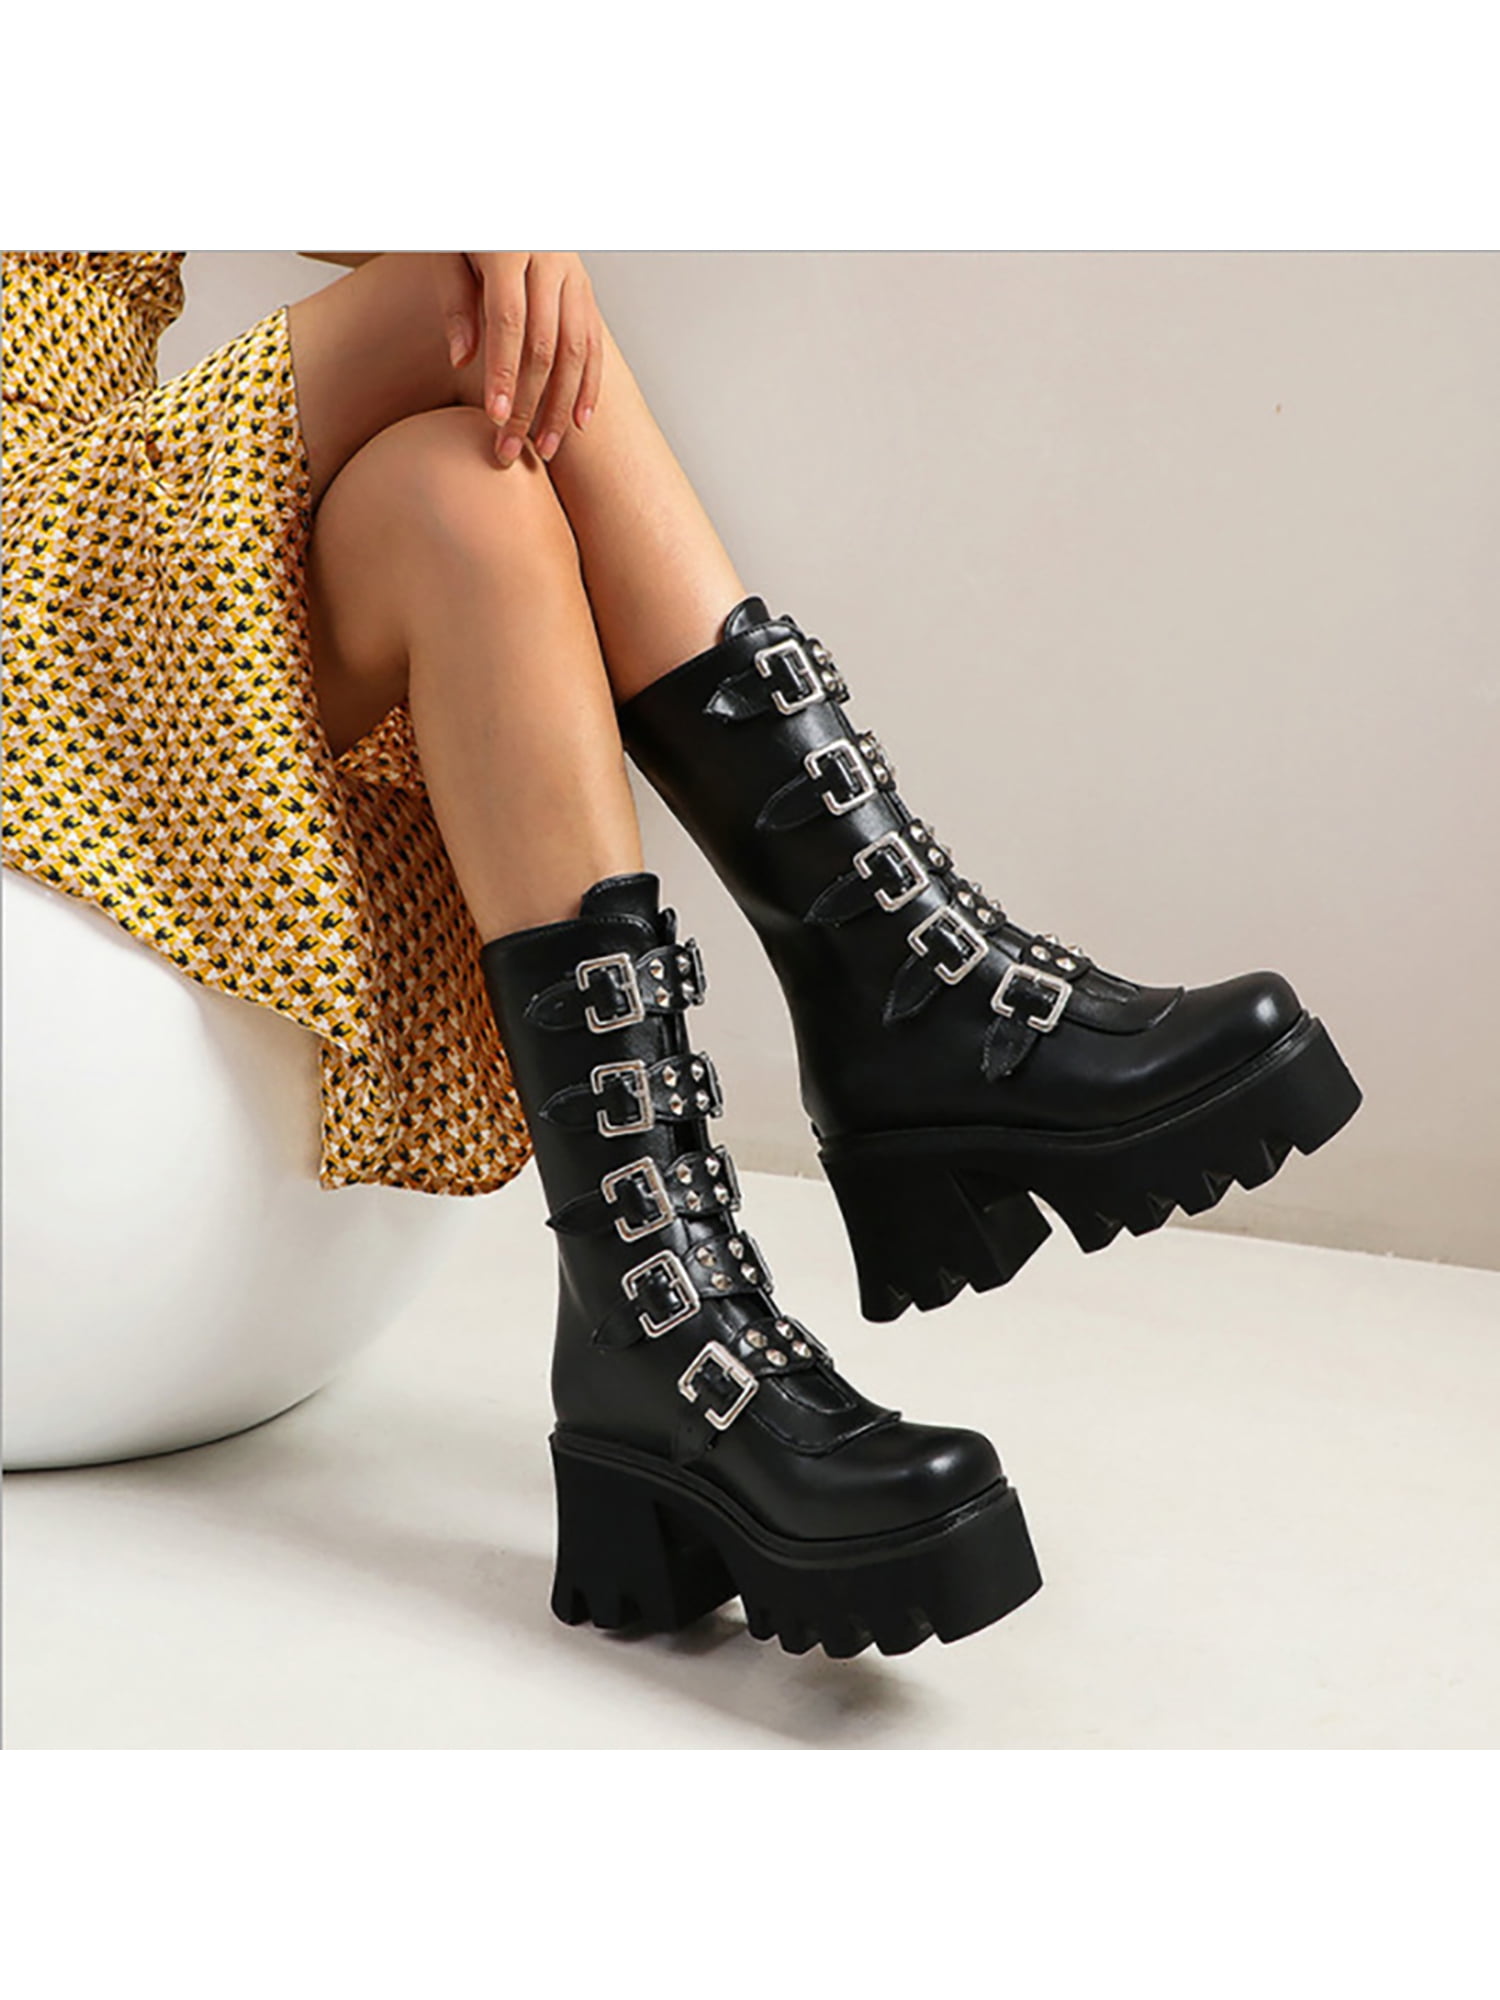 US Womens Goth Platform High Heel Ankle Boots Punk Style Buckle Zip UP Shoes